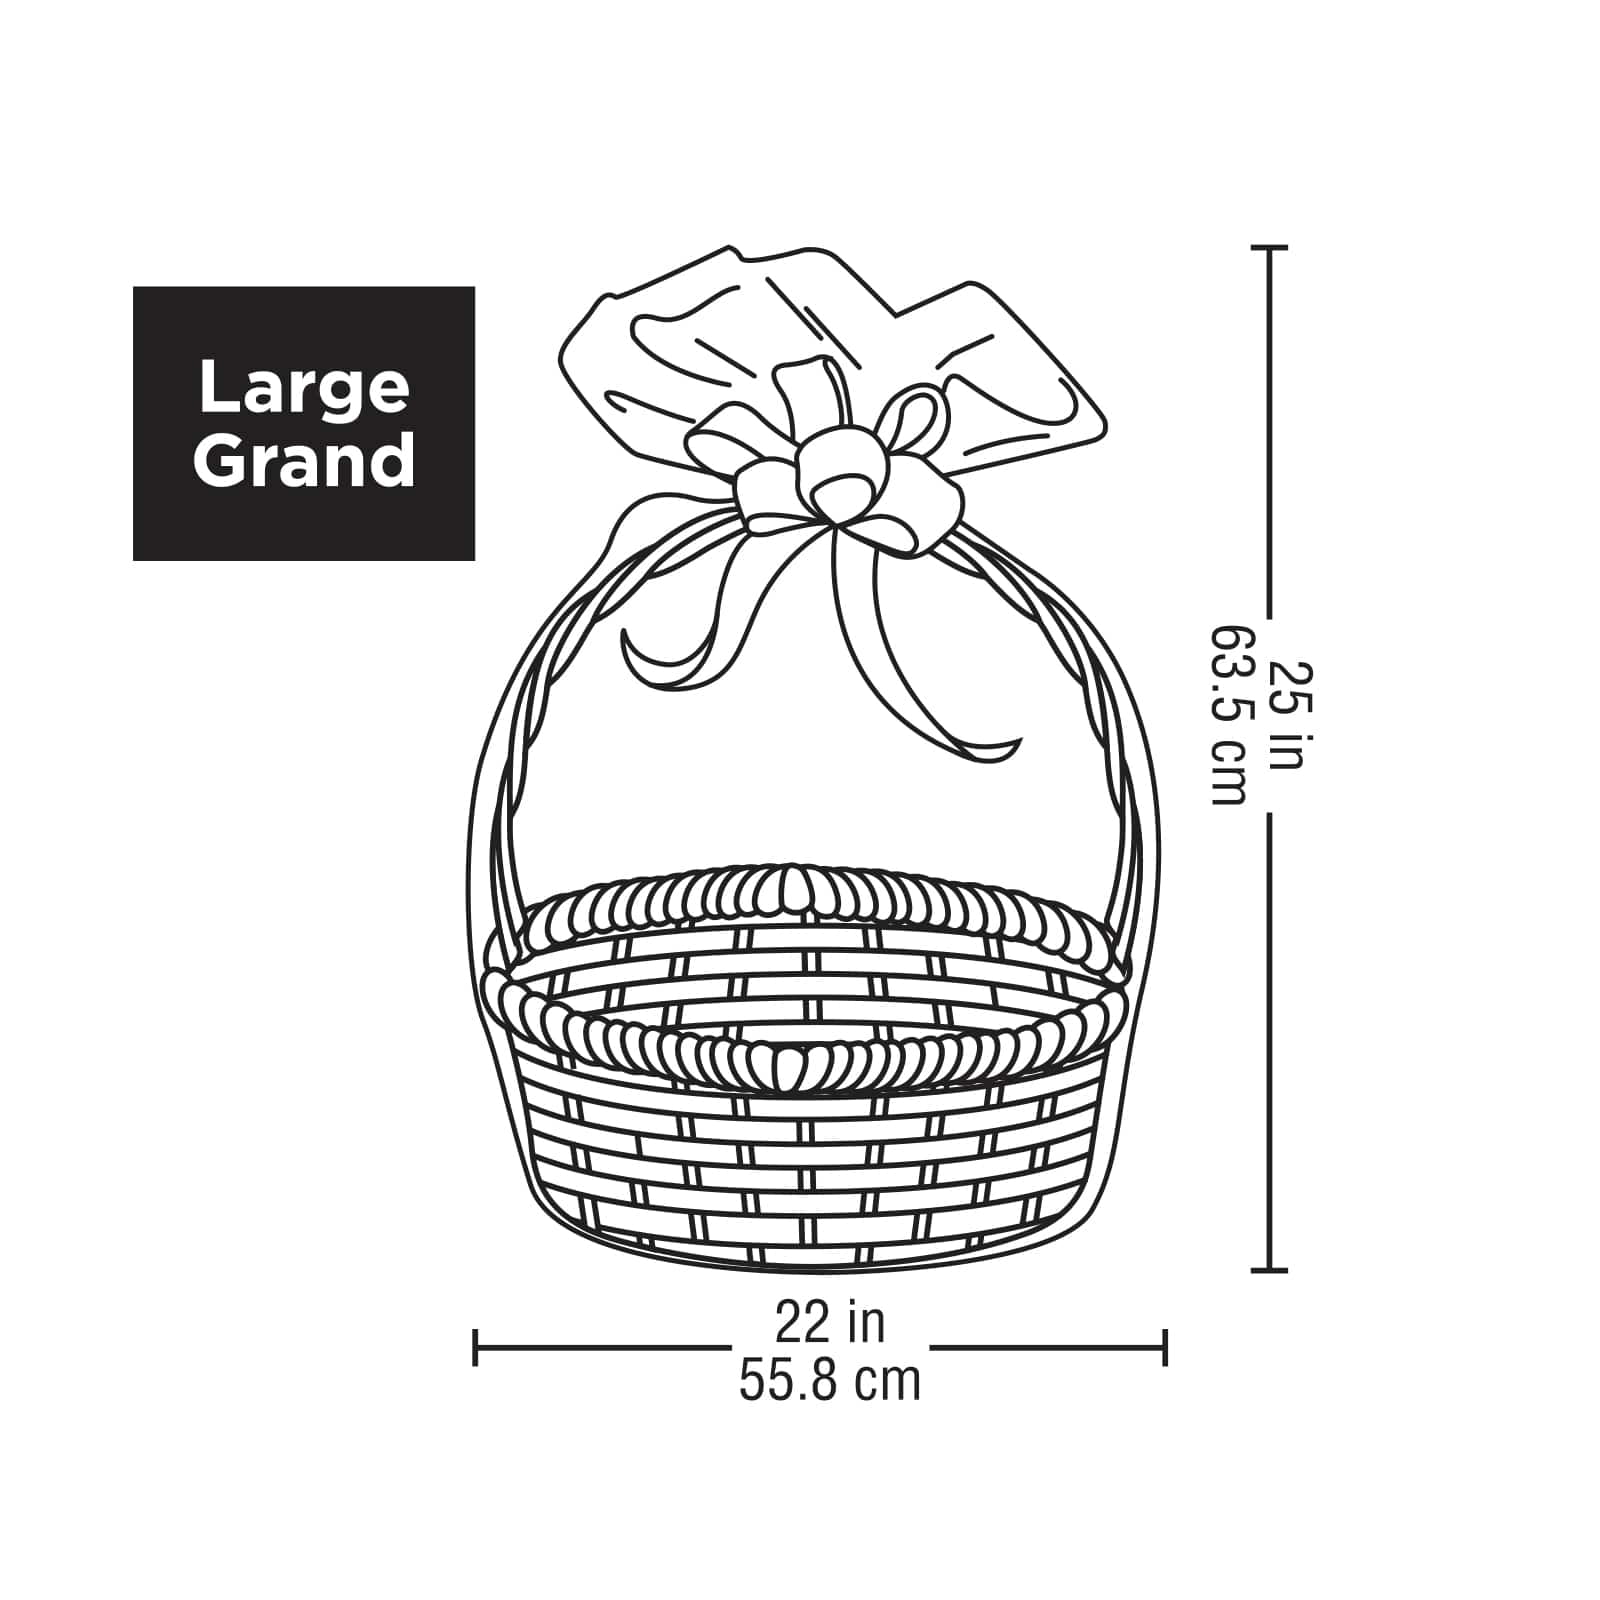 6 Packs: 24 ct. (144 total) Extra Small Basket Gift Bags by Celebrate It™